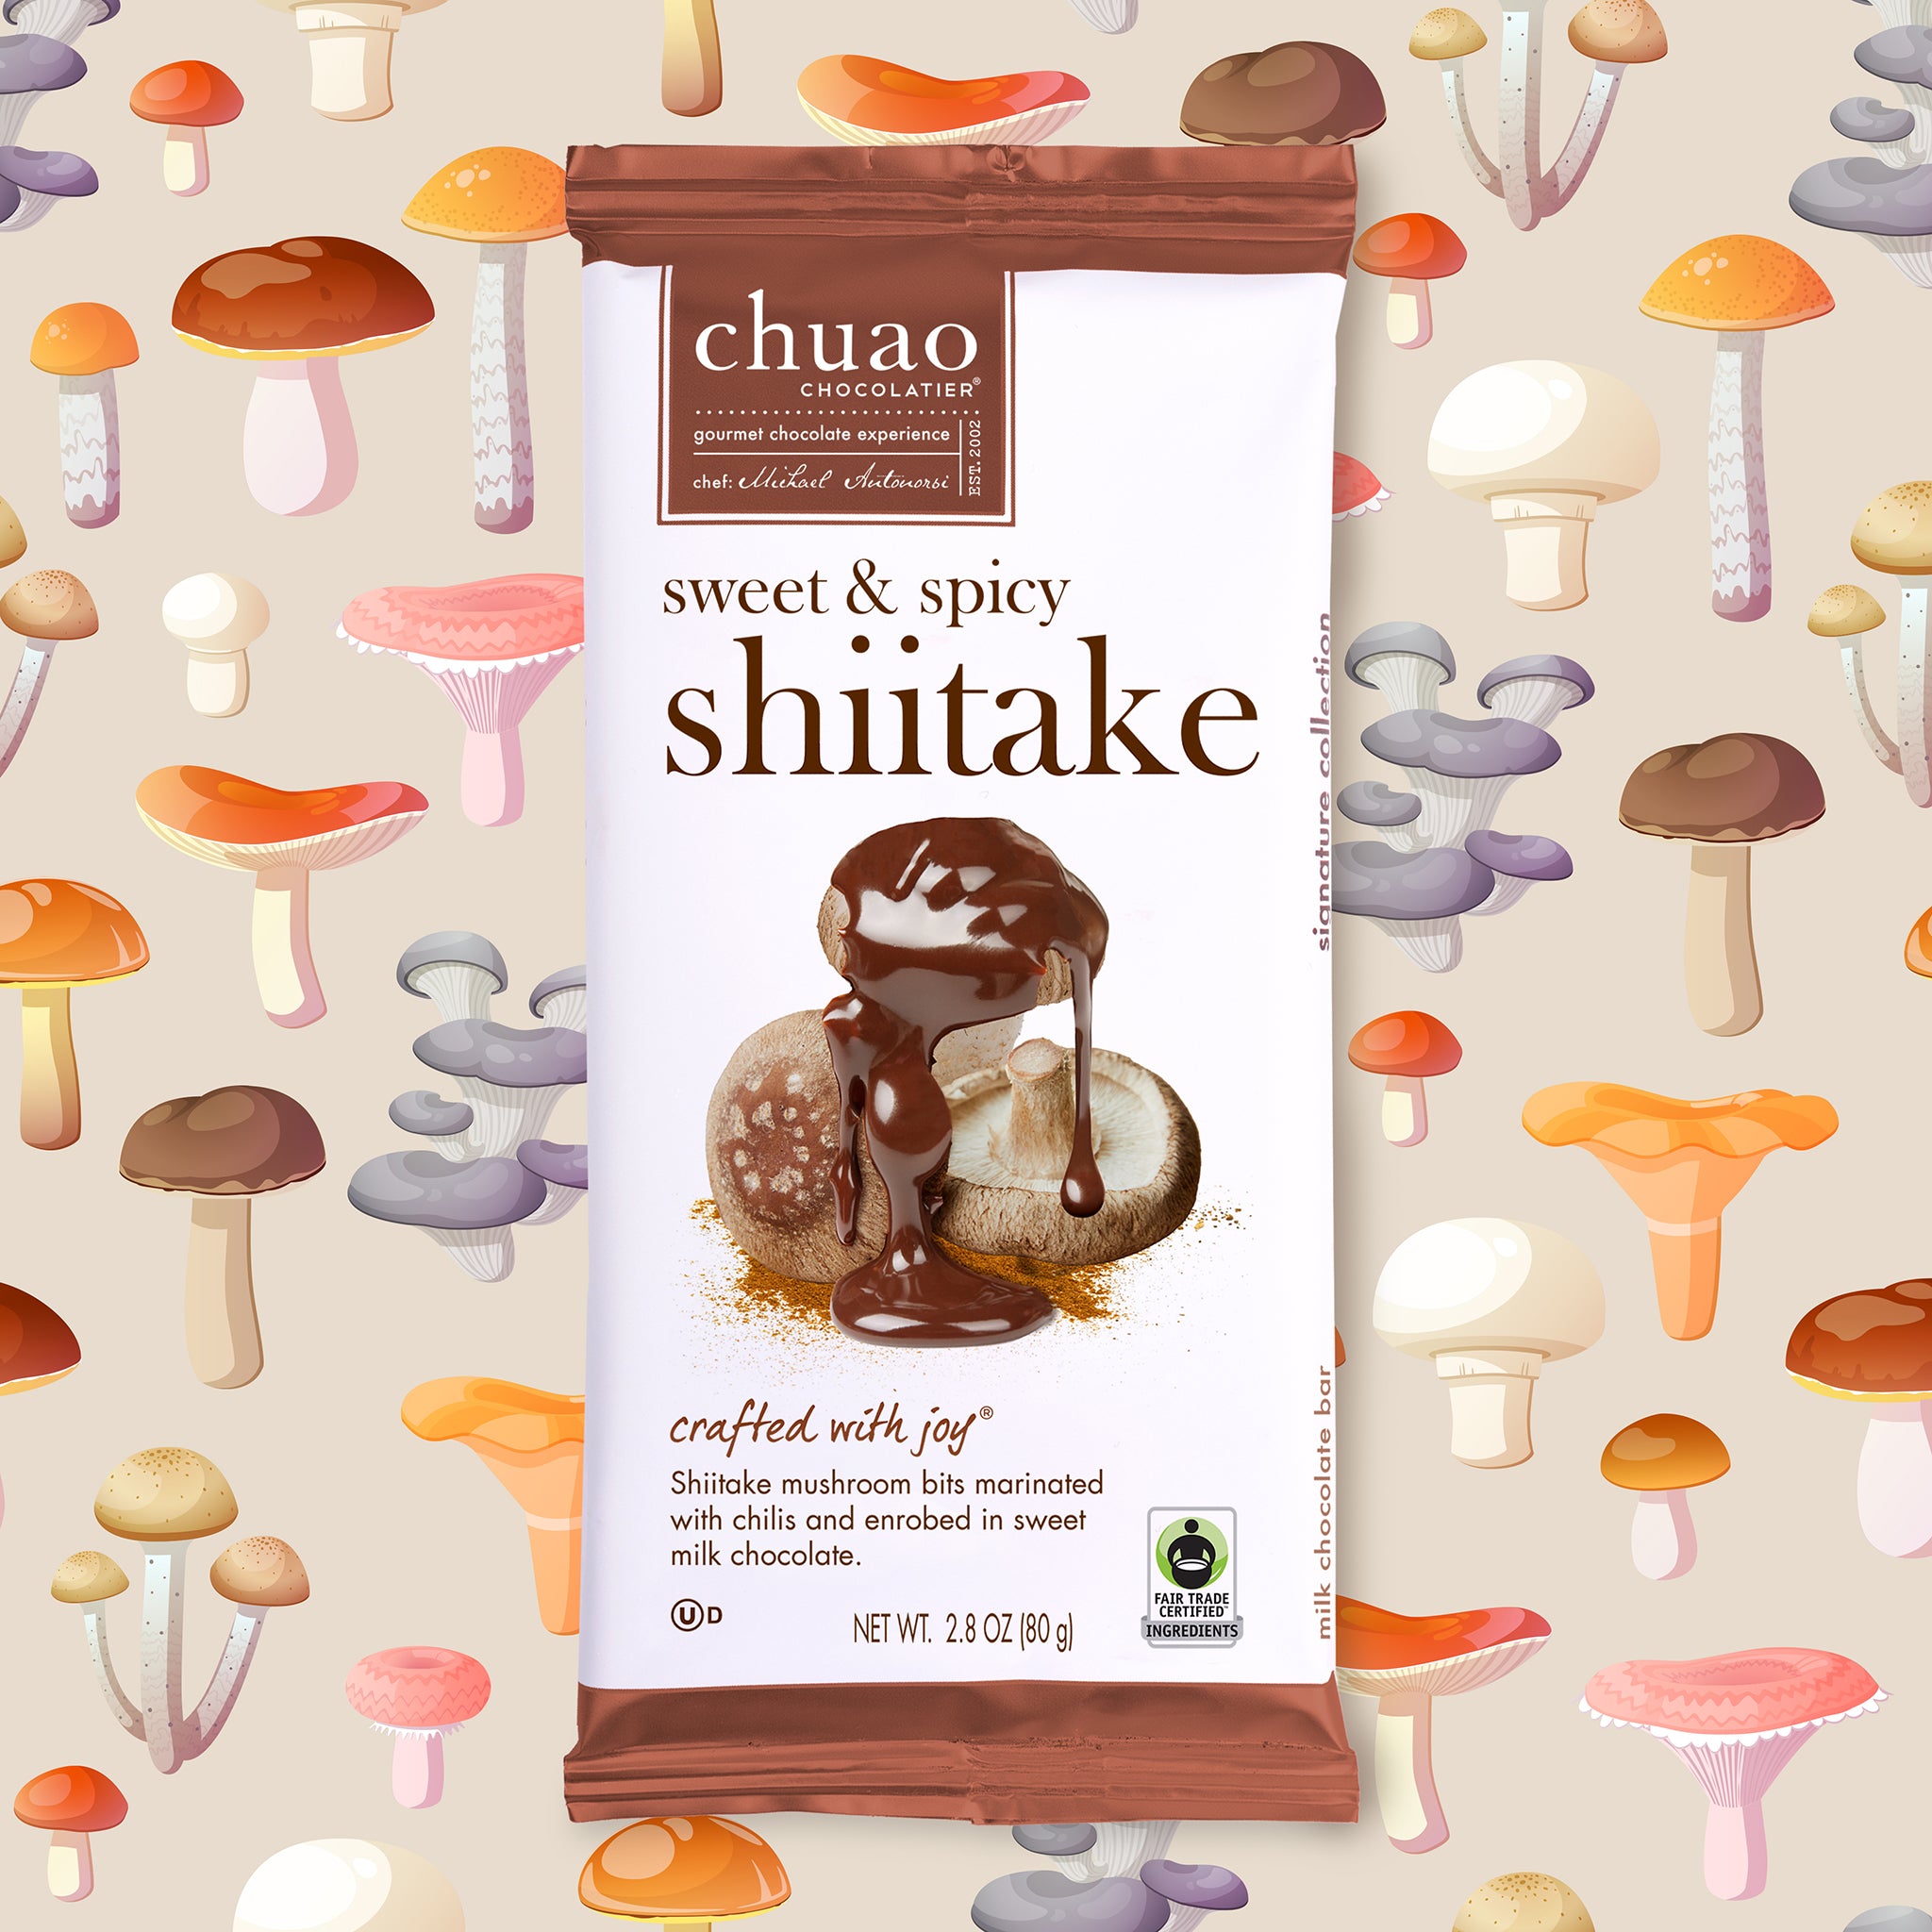 a package of chocolate showing shiitake mushrooms covered in melting chocolate and spices 